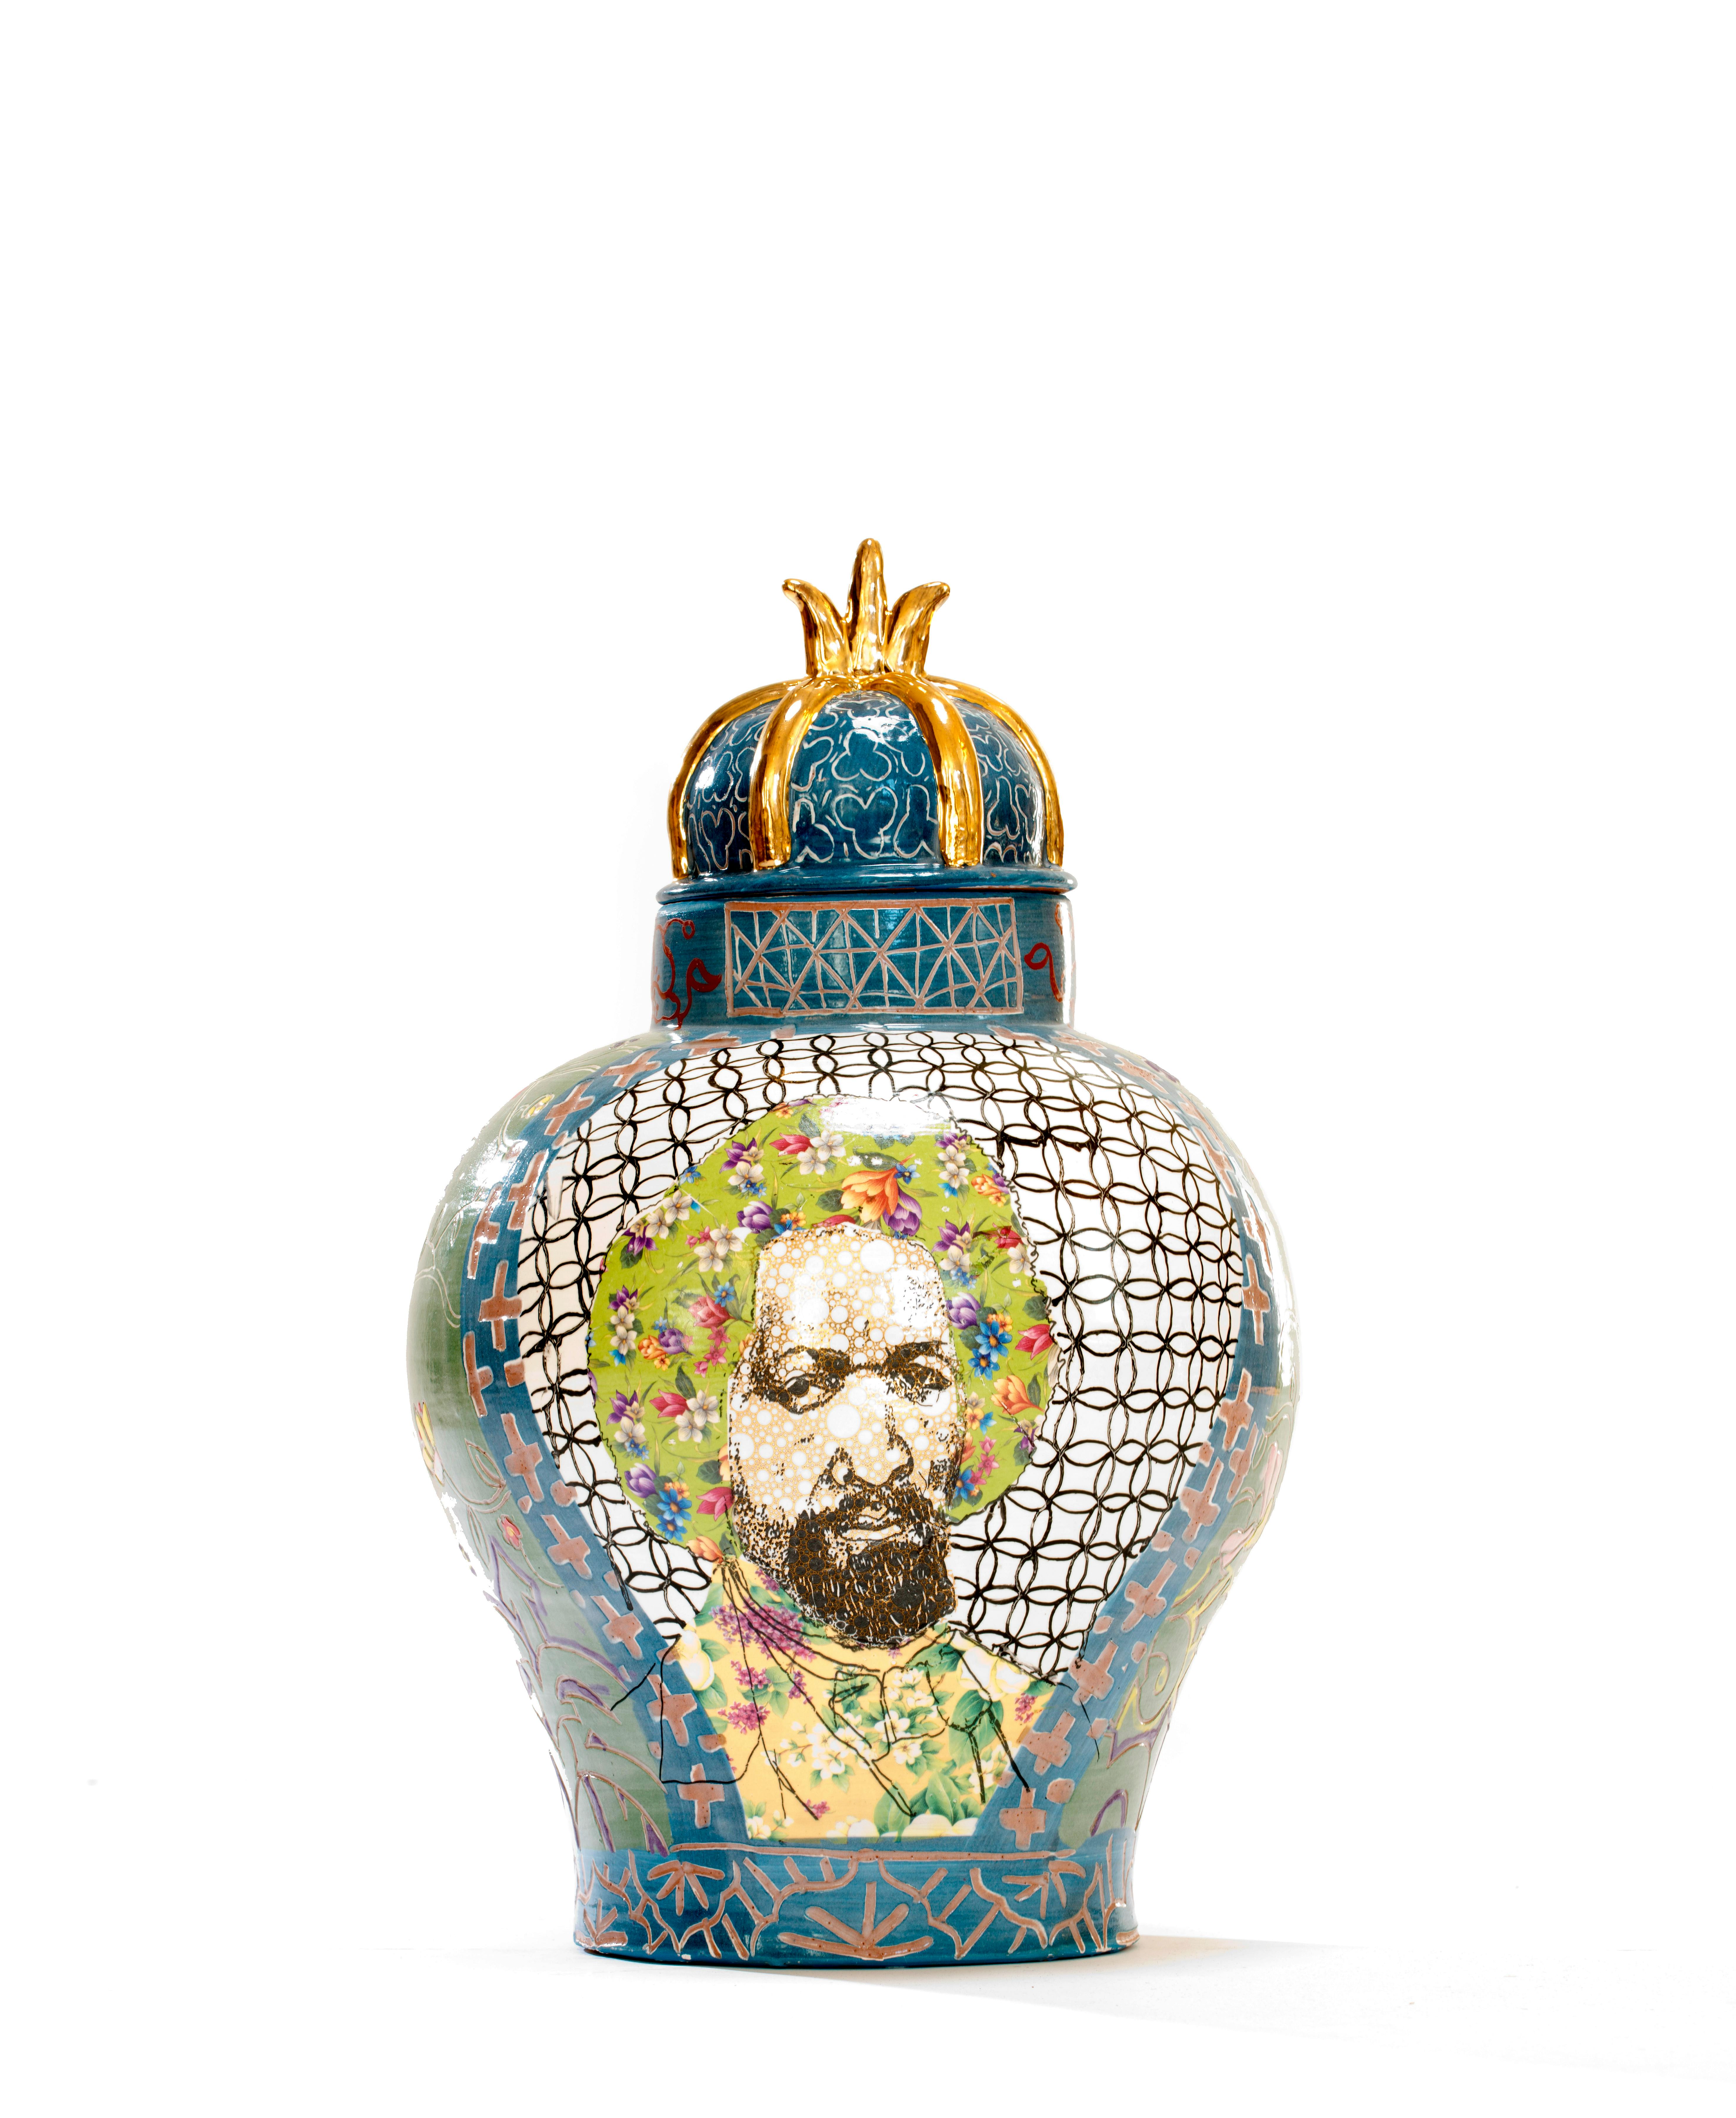 Colorful ceramic urn with face of Frederick Douglass